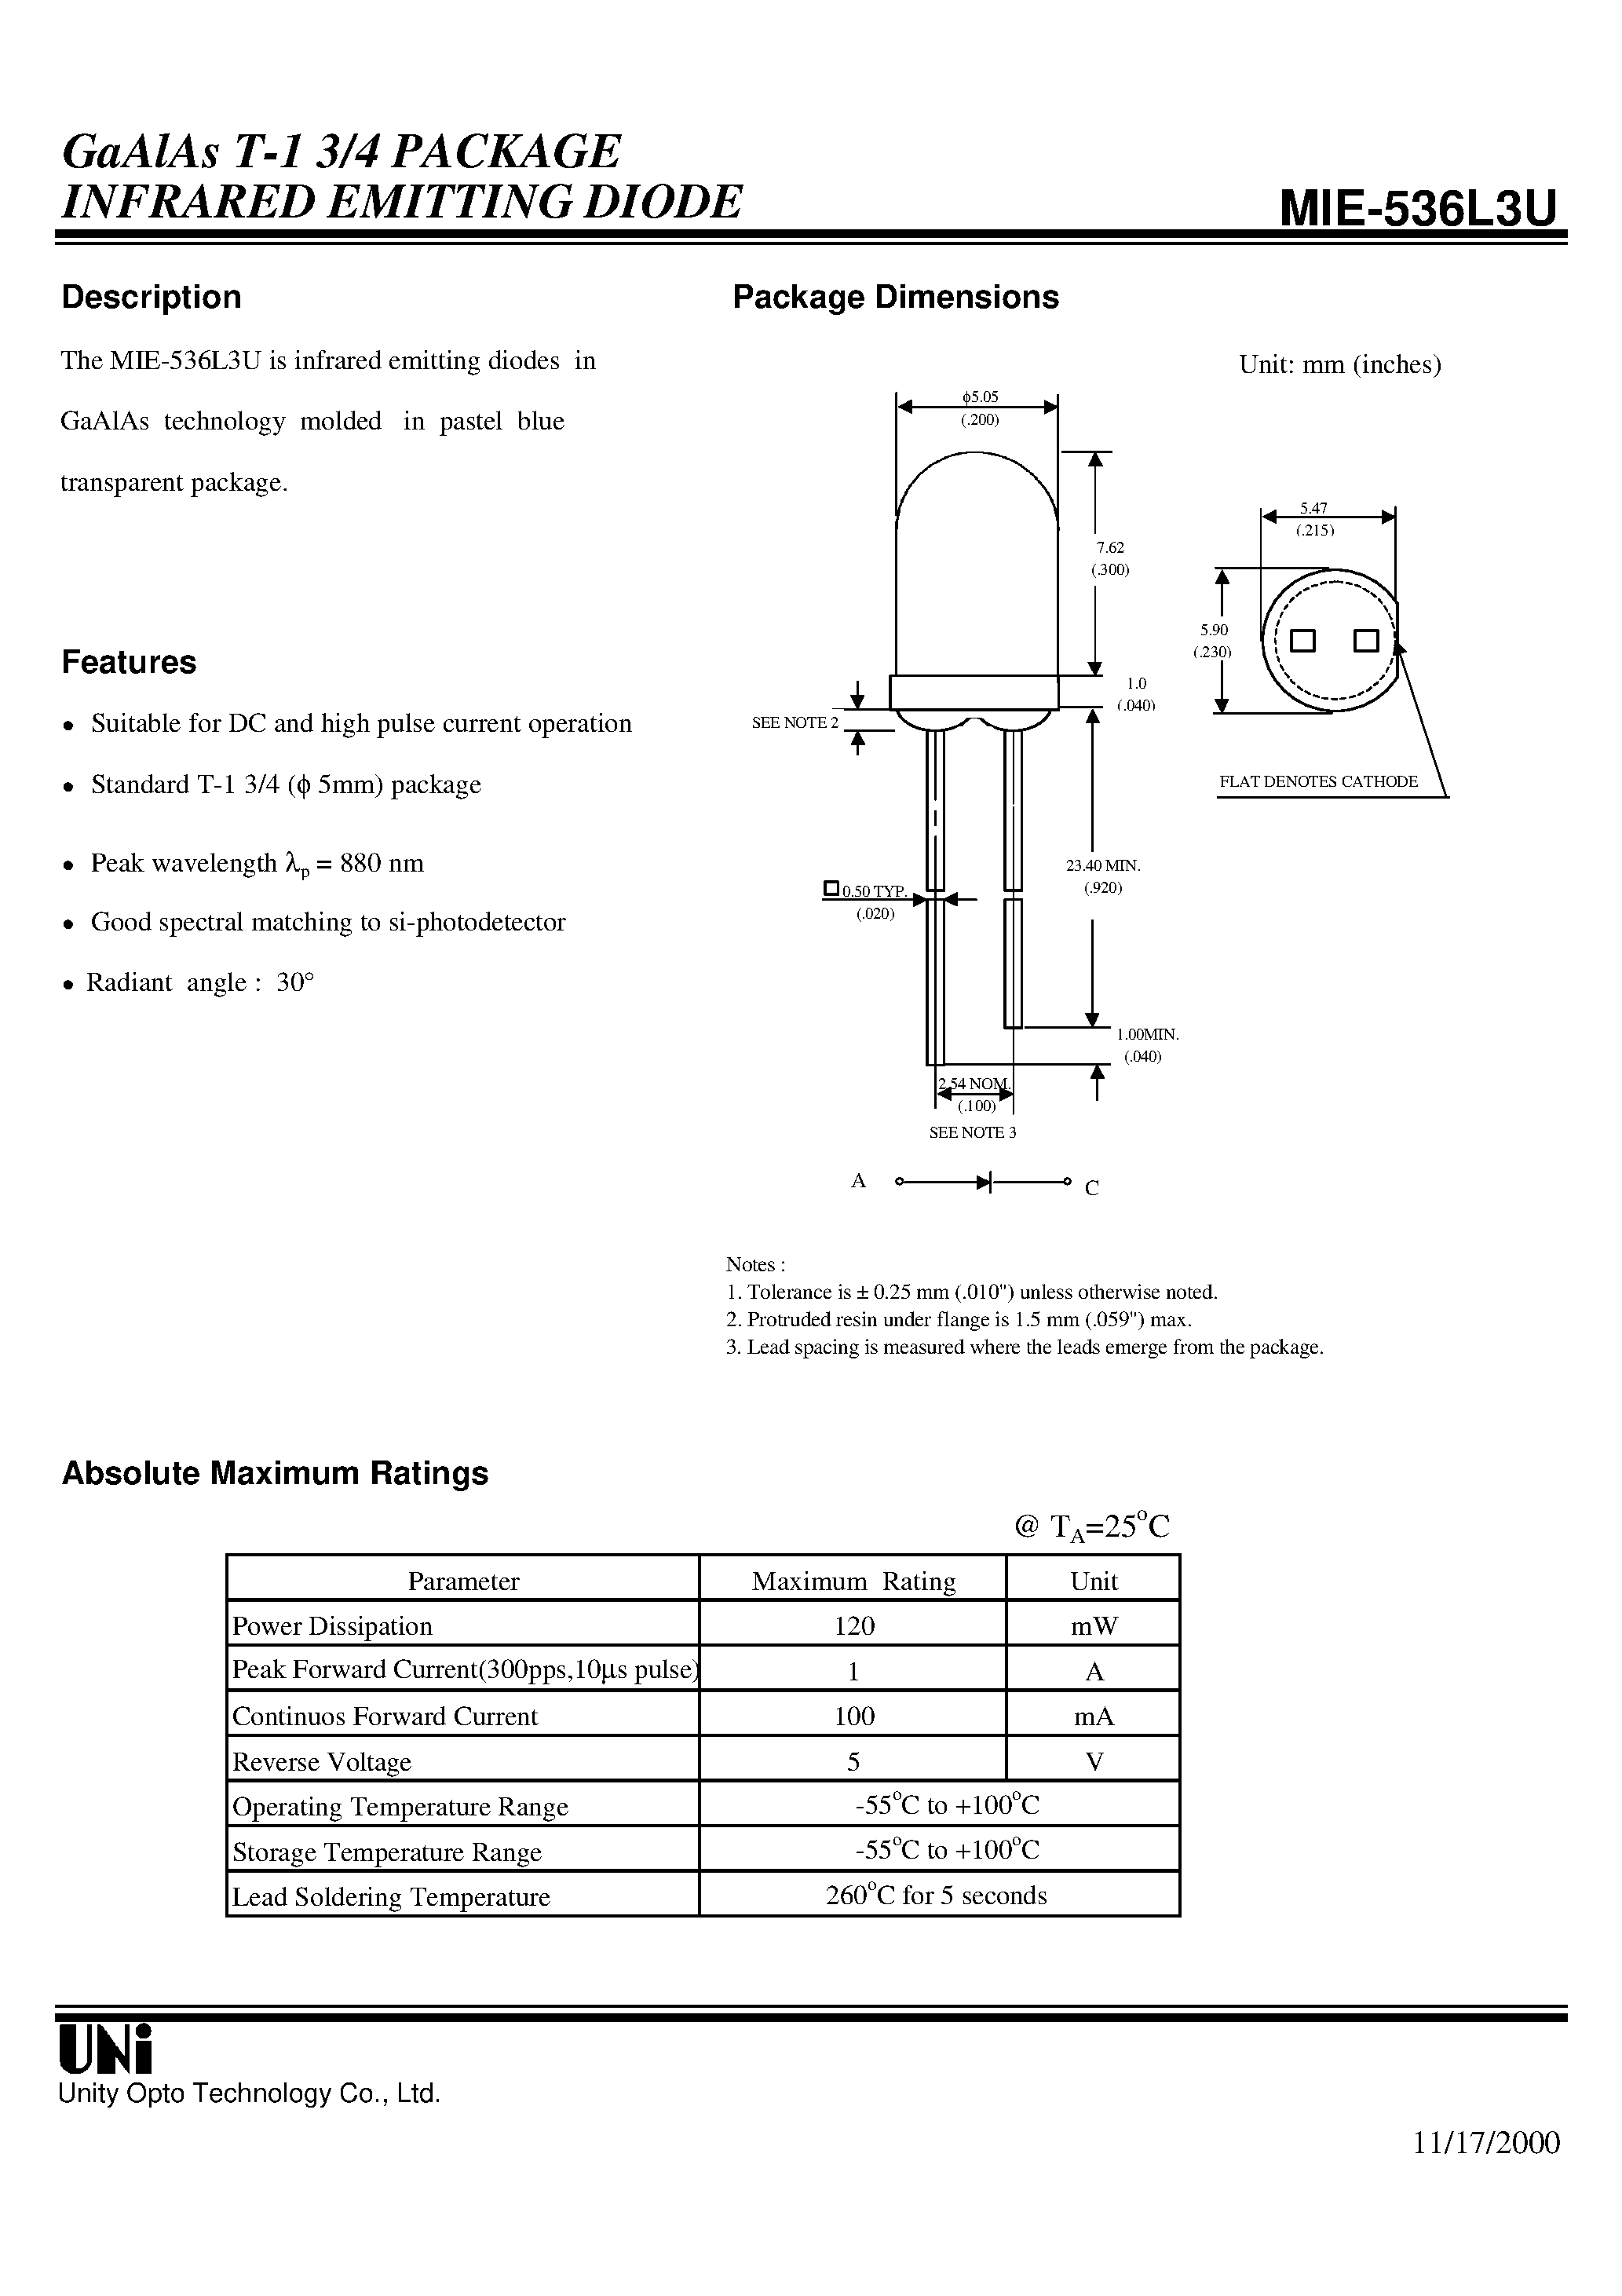 Datasheet MIE-536L3U - GaAlAs T-1 3/4 PACKAGE INFRARED EMITTING DIODE page 1